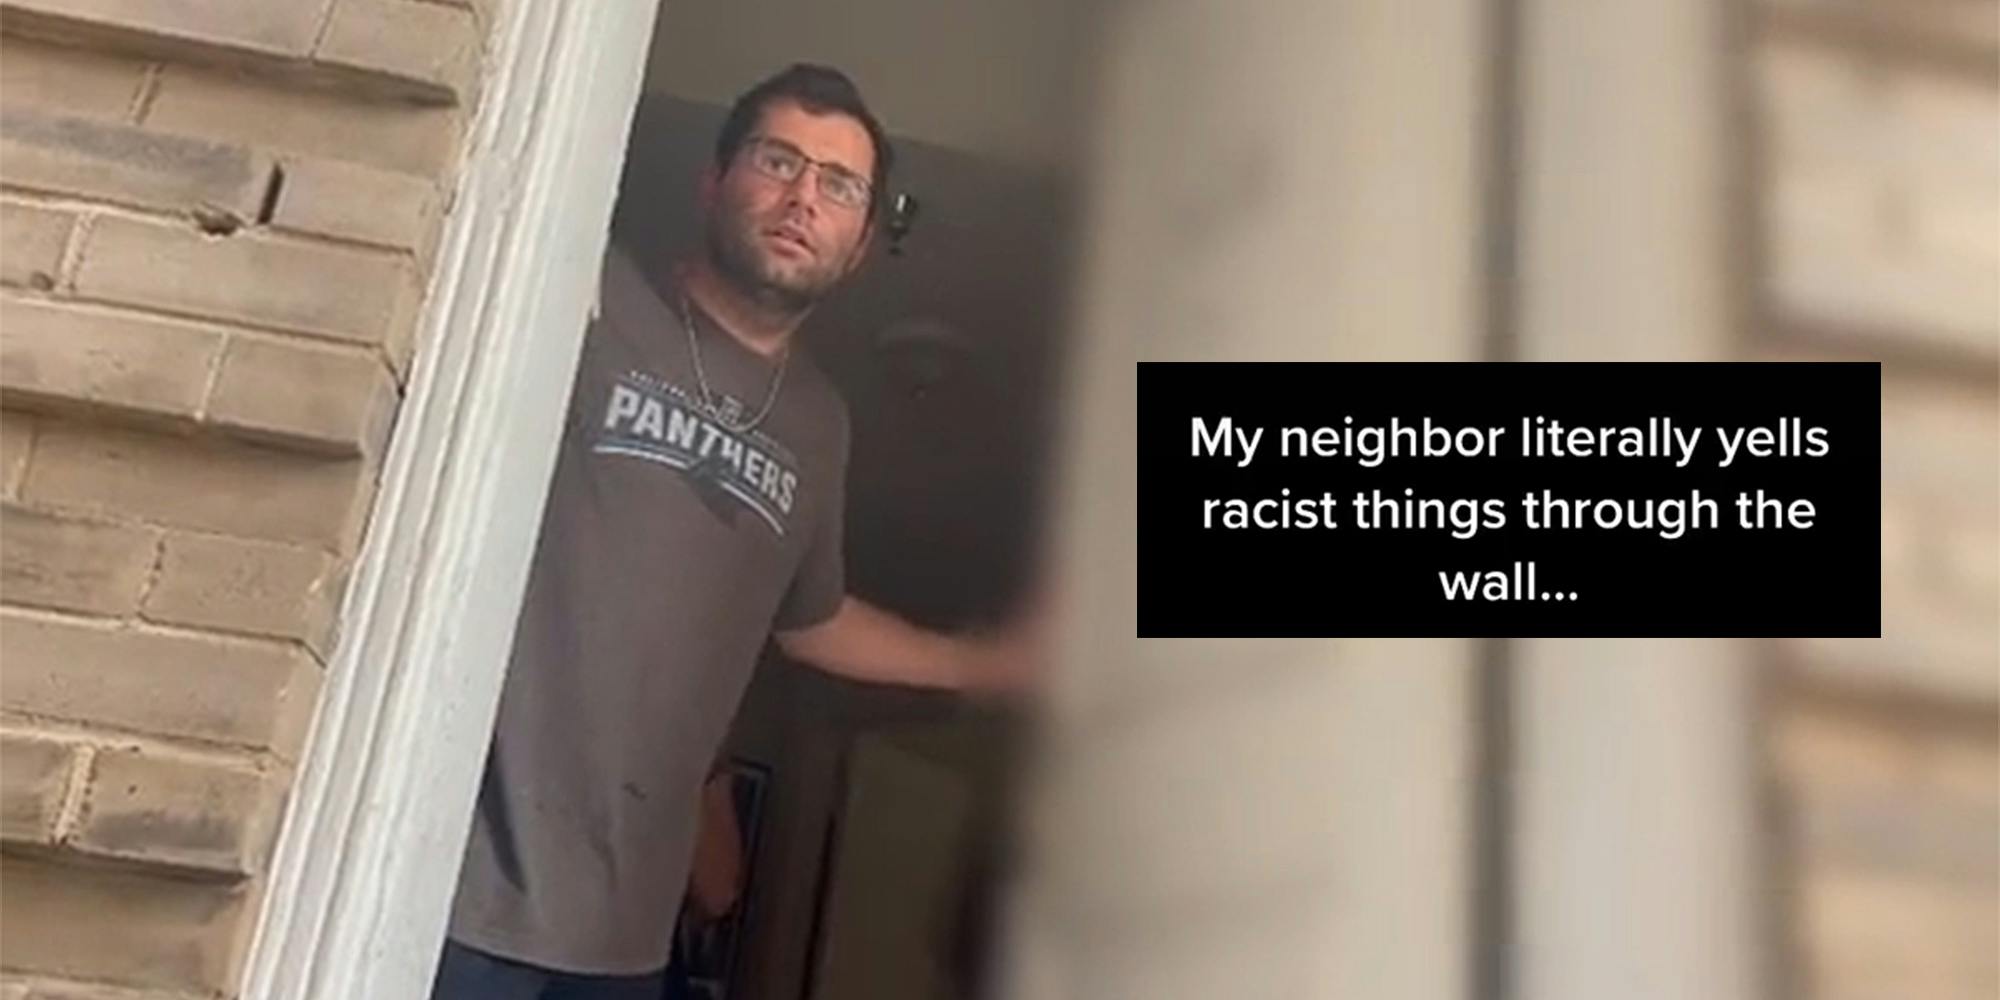 man opening front door with caption "My neighbor literally yells racist things through the wall..."